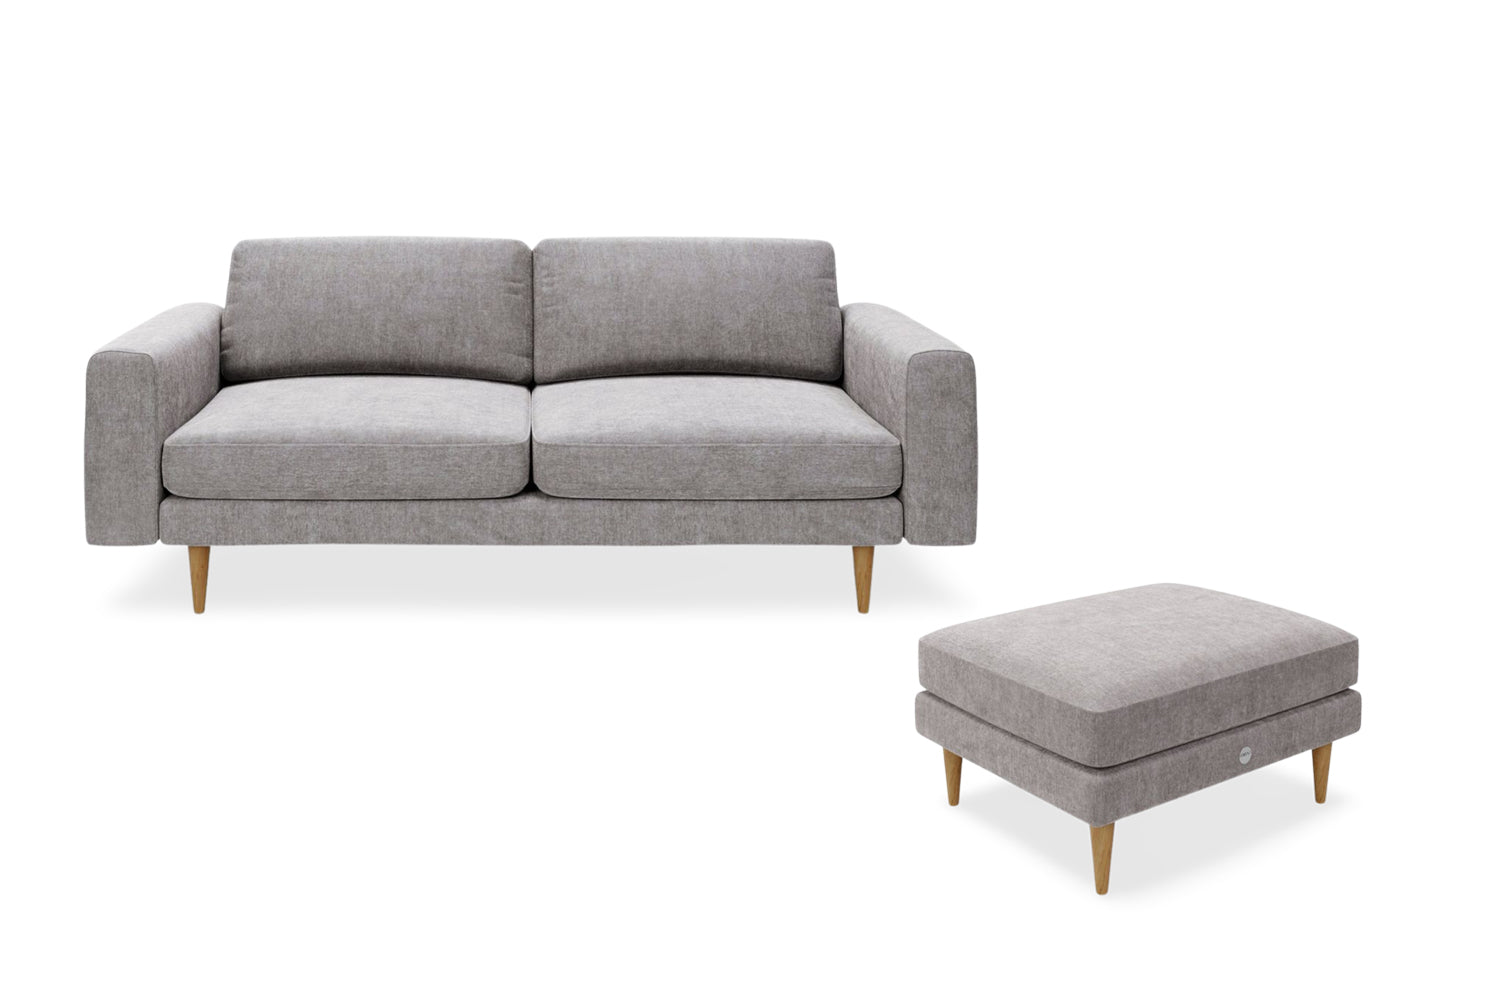 The Big Chill - 3 Seater Sofa and Footstool Set - Mid Grey